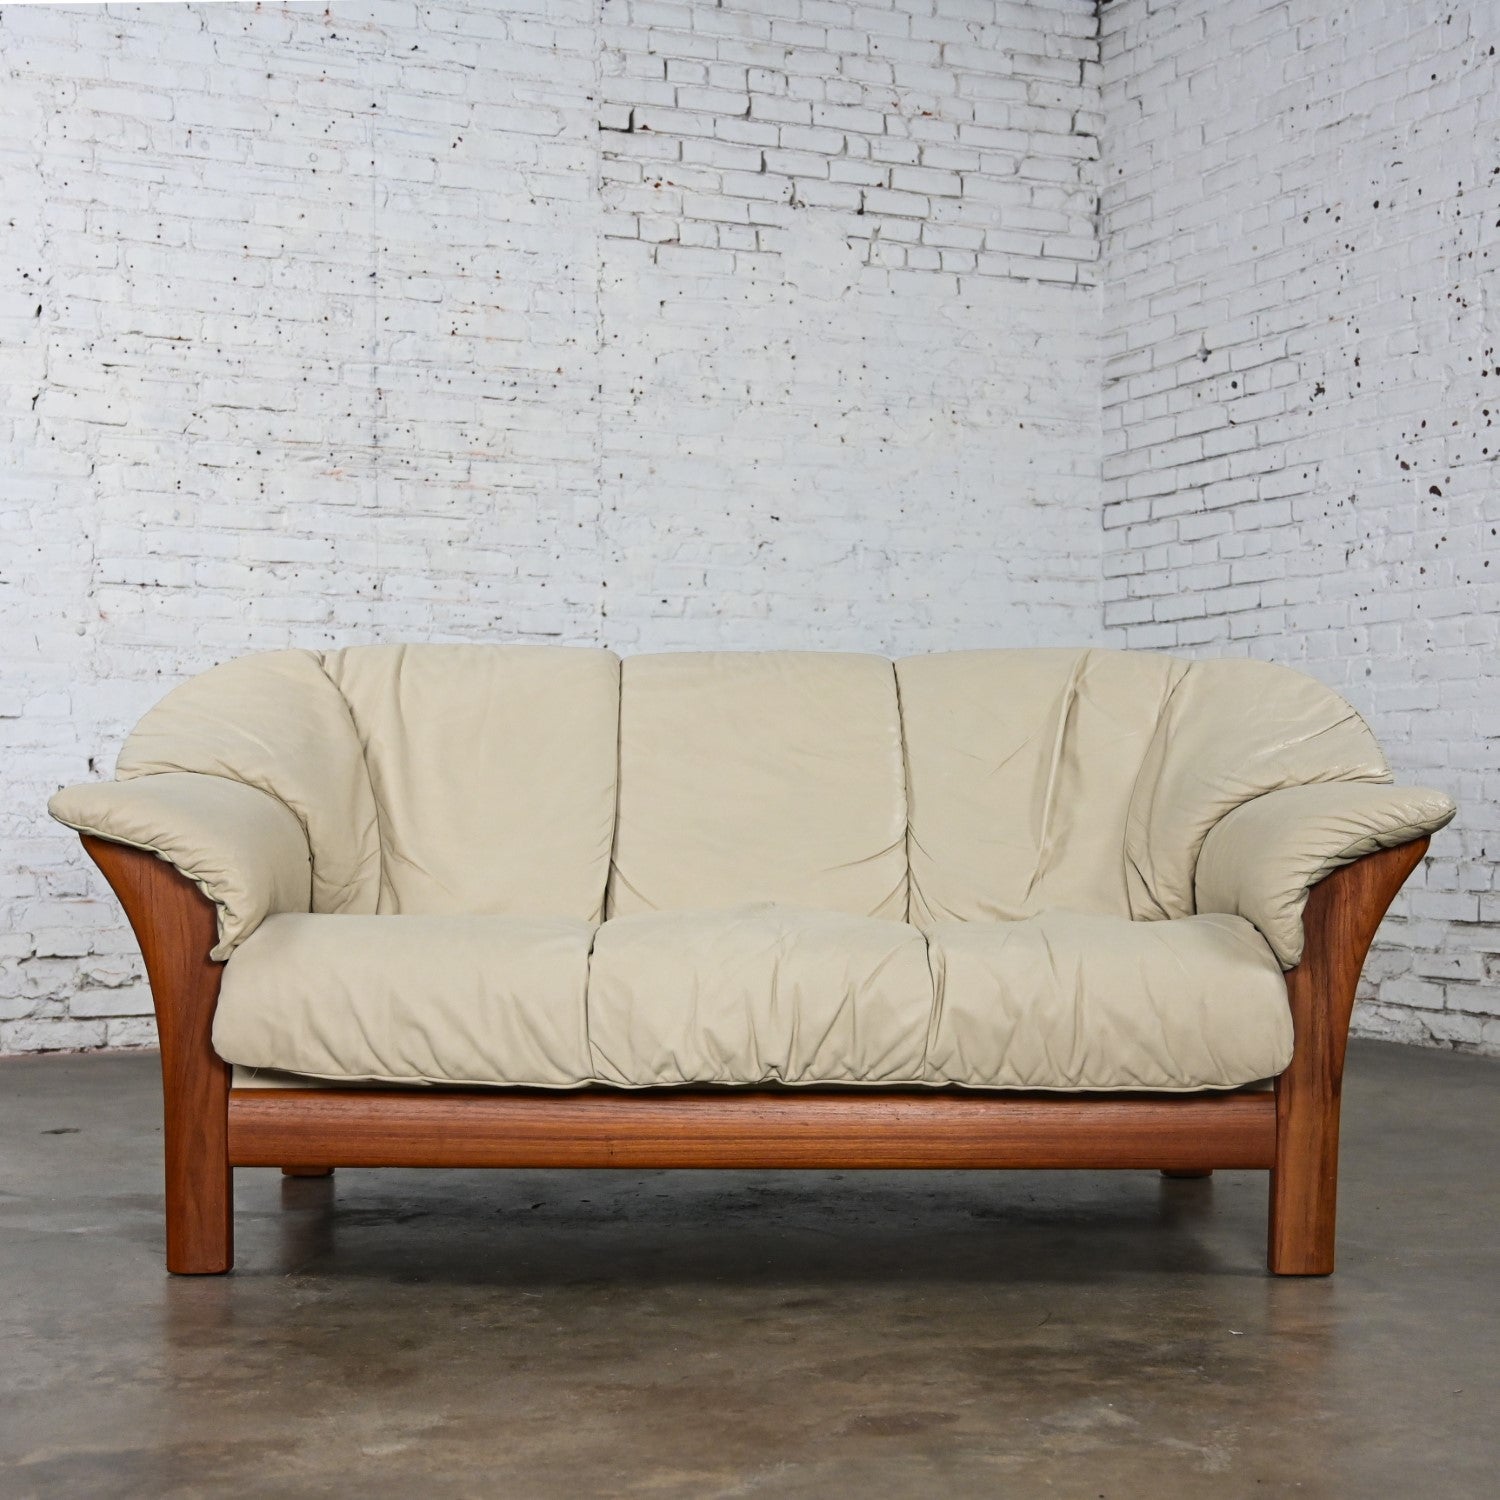 Marvelous vintage Scandinavian Modern small leather sofa Attributed to Ekornes comprised of a teak frame and off-white leather removeable seat, back, and arm zippered cushions. This piece has been attributed based upon archived research including